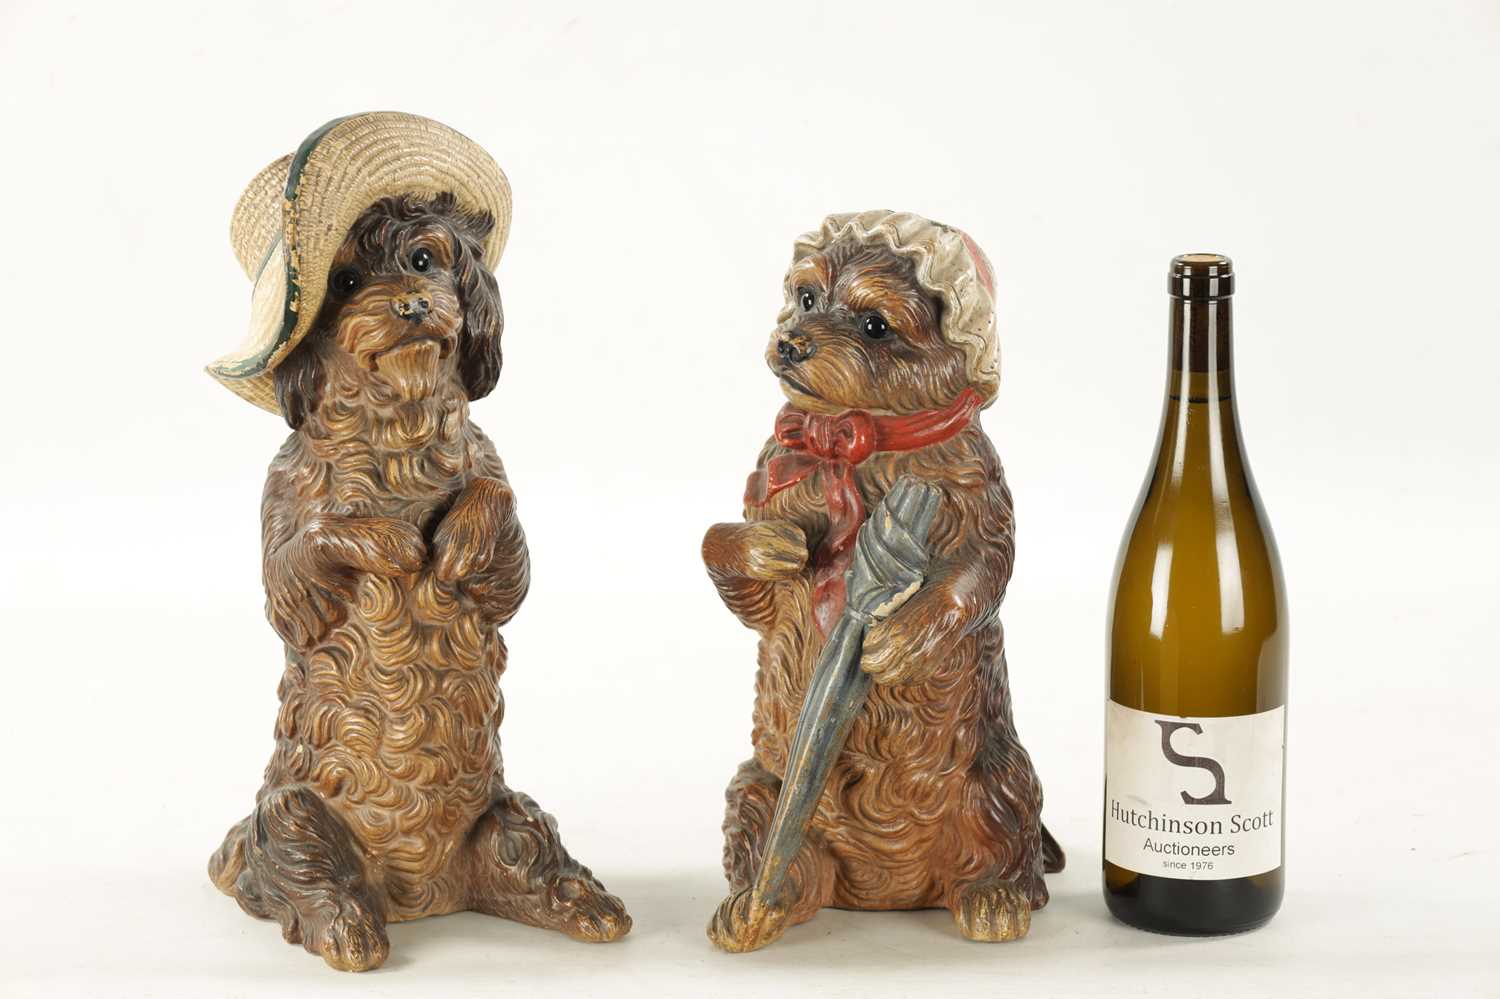 A PAIR OF LATE 19TH CENTURY AUSTRIAN COLD-PAINTED TERRACOTTA MODELS OF DOGS - Image 2 of 8